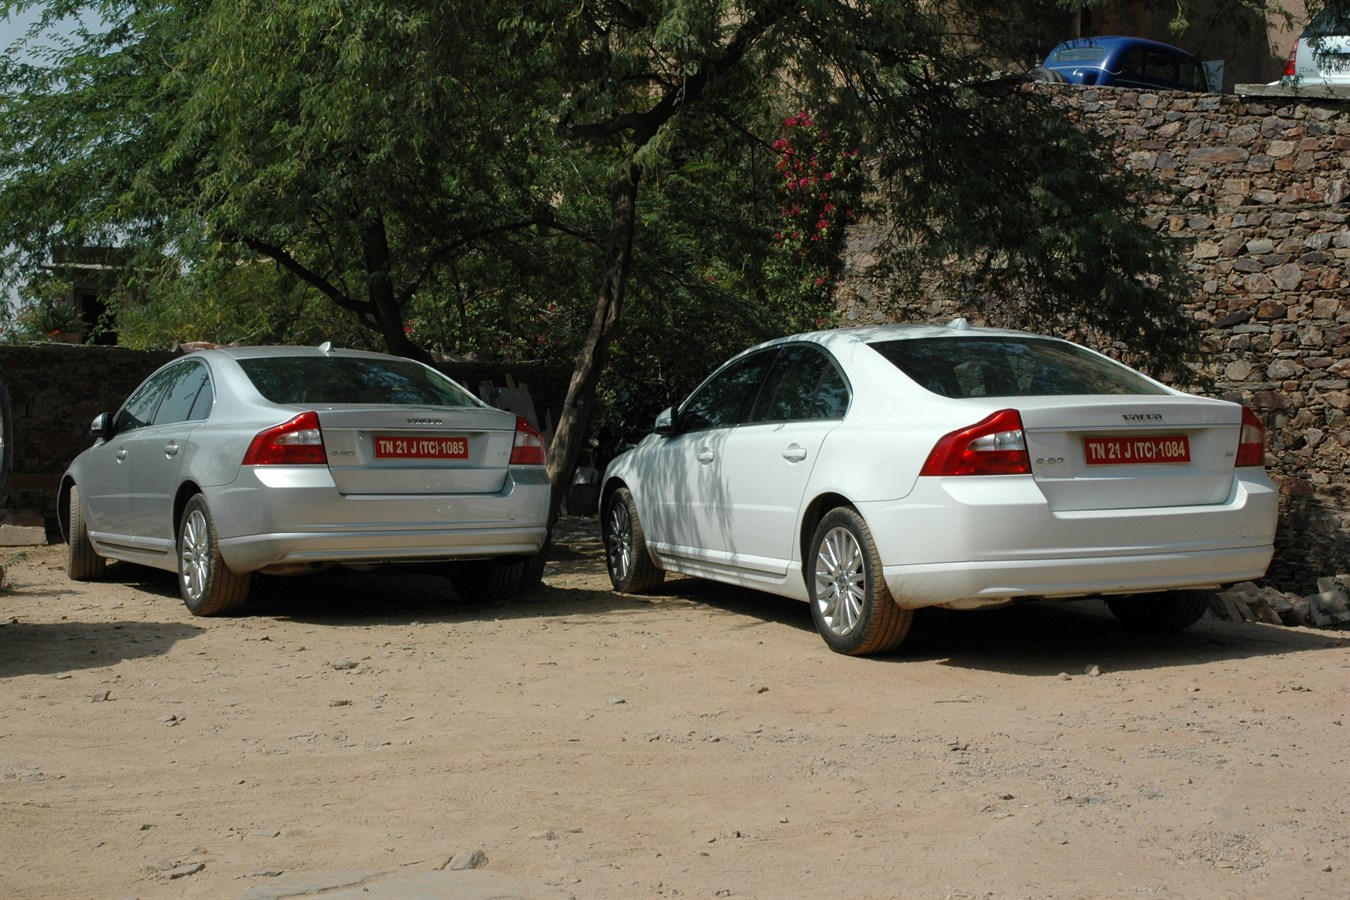 Volvo Cars in India - both Volvo S80 and Volvo XC90 were introduced in 2007